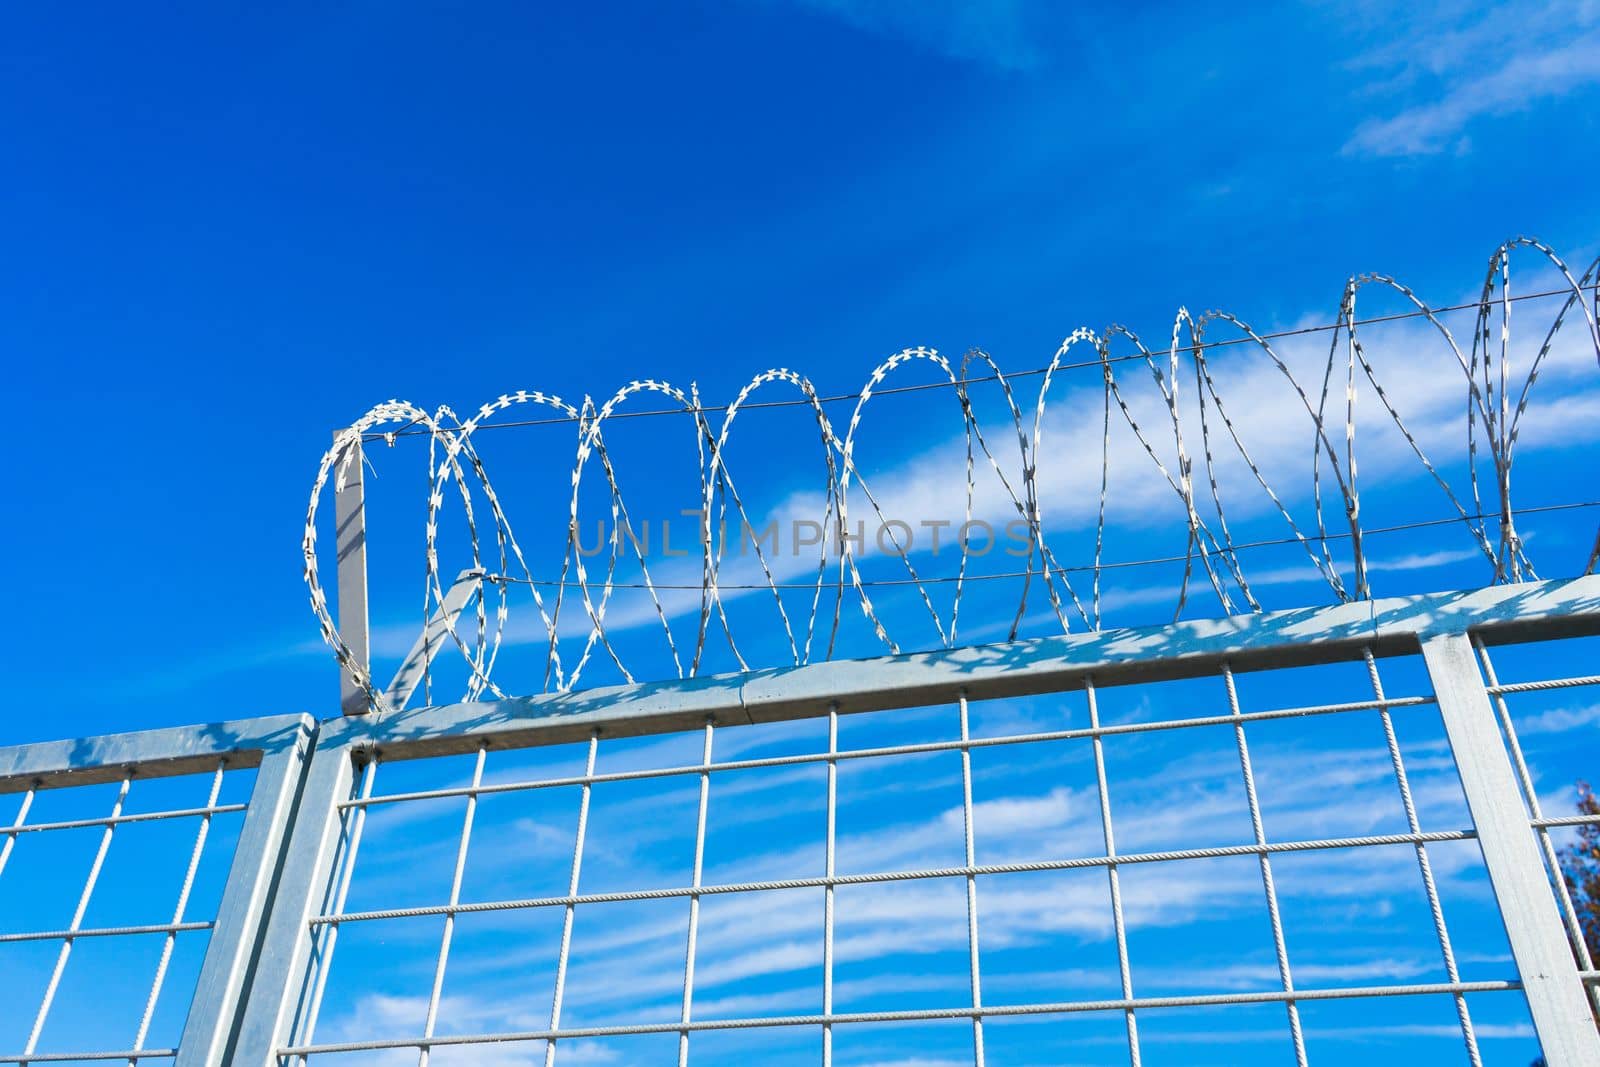 Barbered wire over blue sky and on building ground, rusty